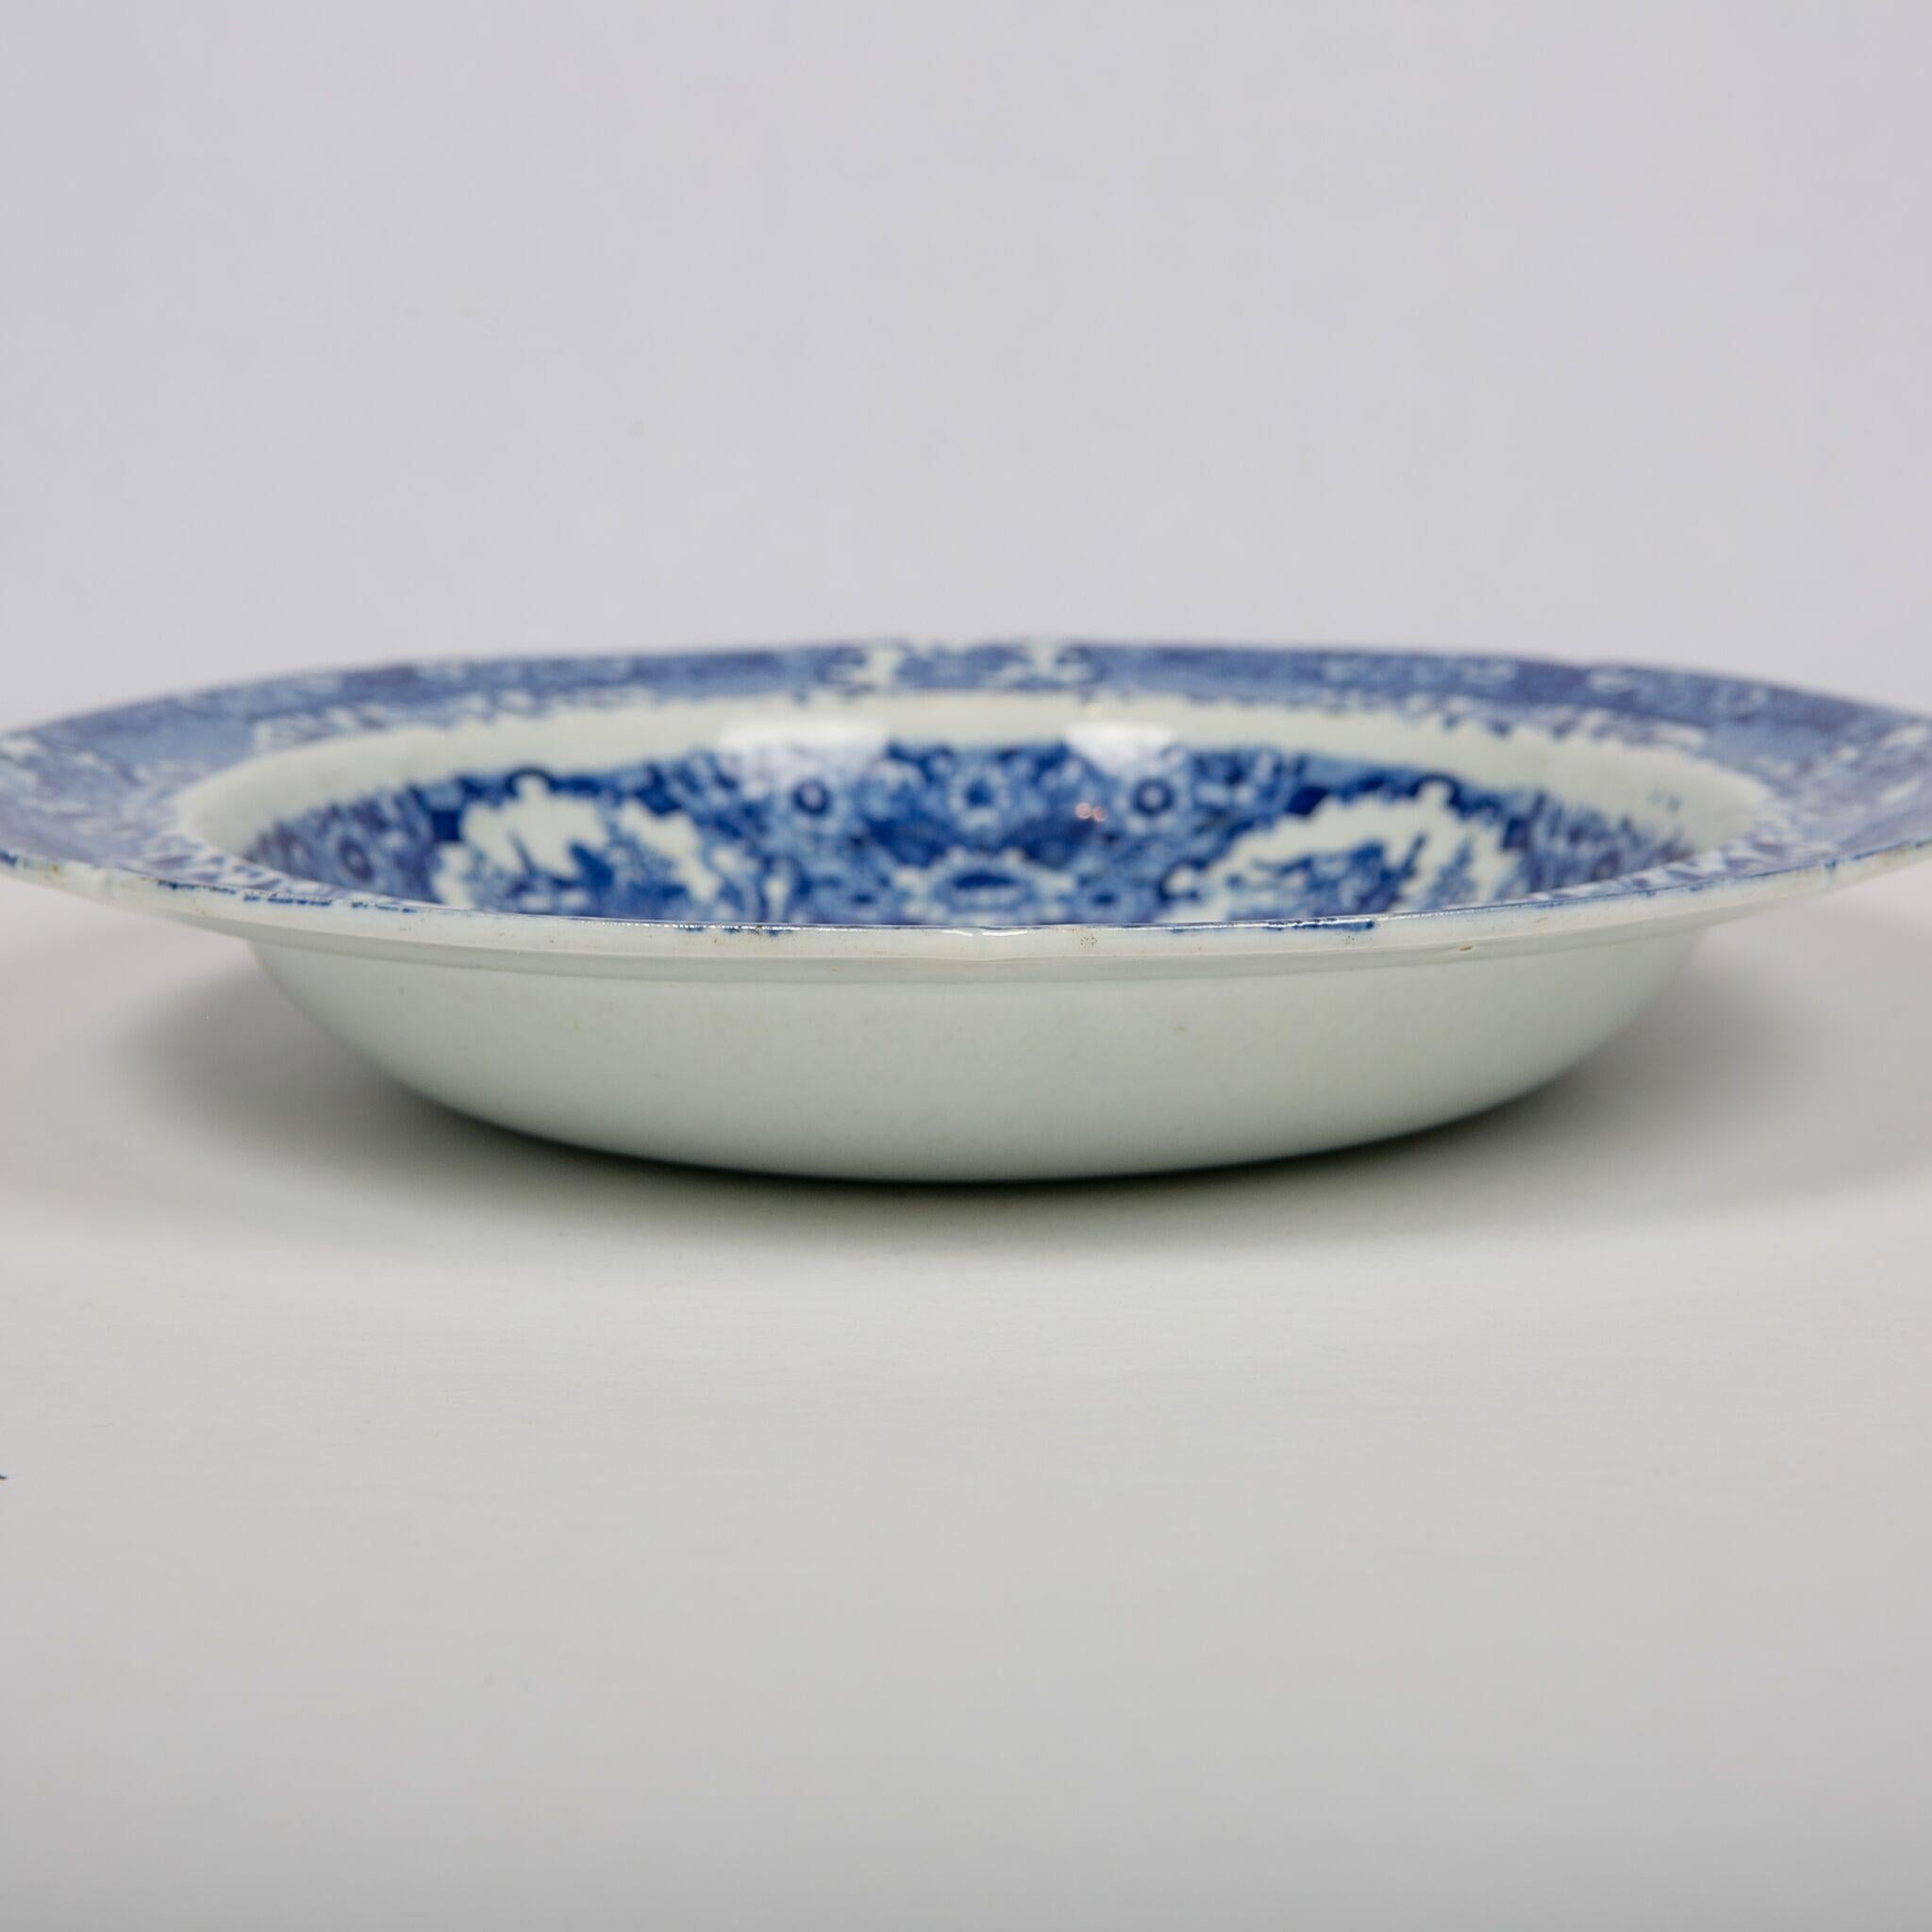 Glazed Five Net Pattern Blue and White Dishes Made Staffordshire England, circa 1820